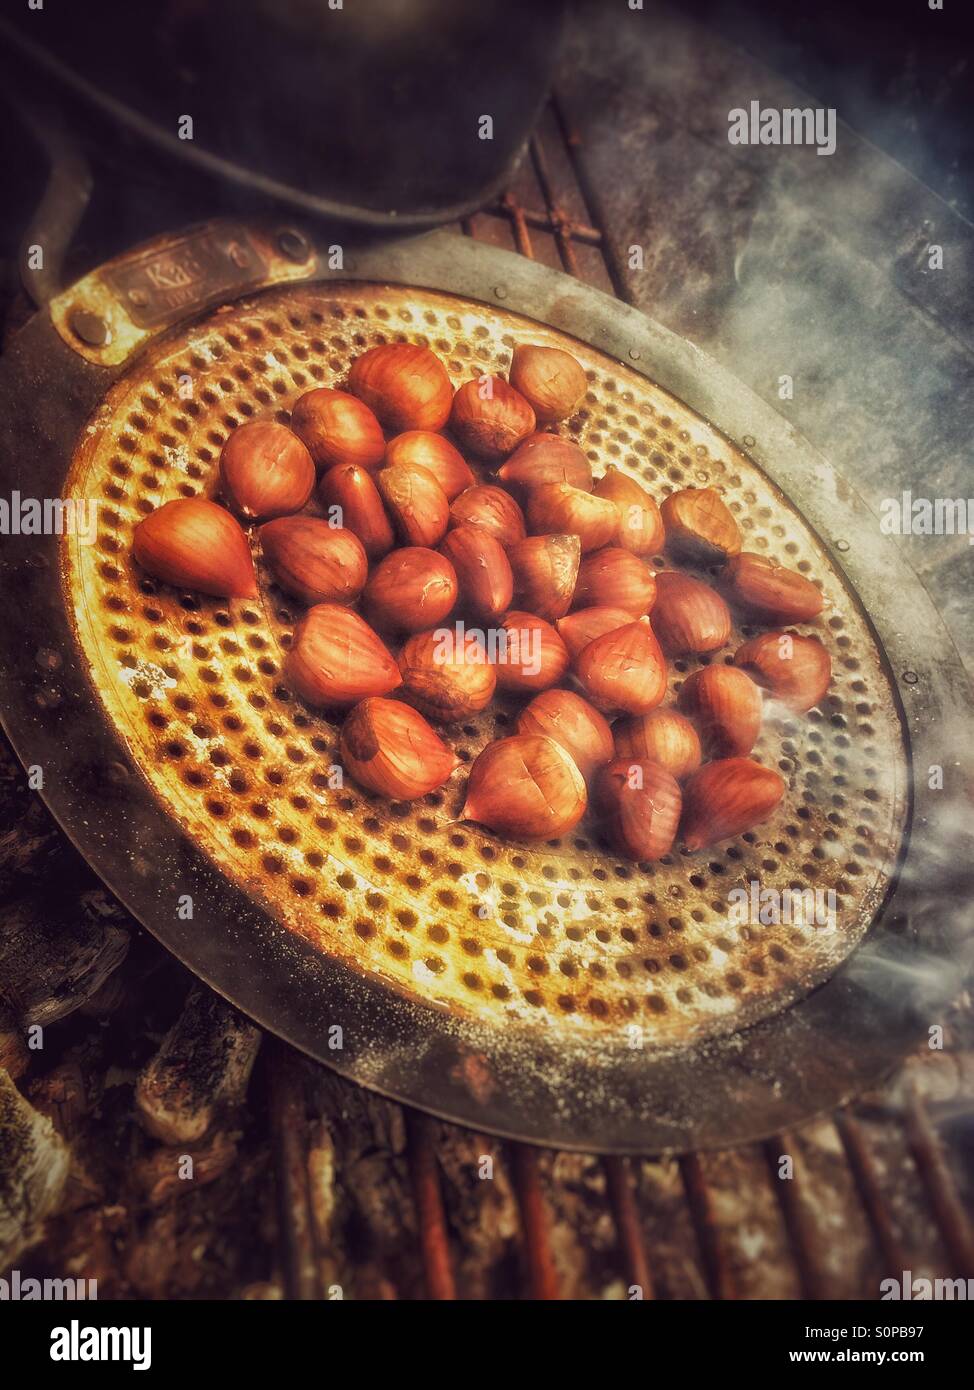 Chestnuts roasting on an open fire Stock Photo